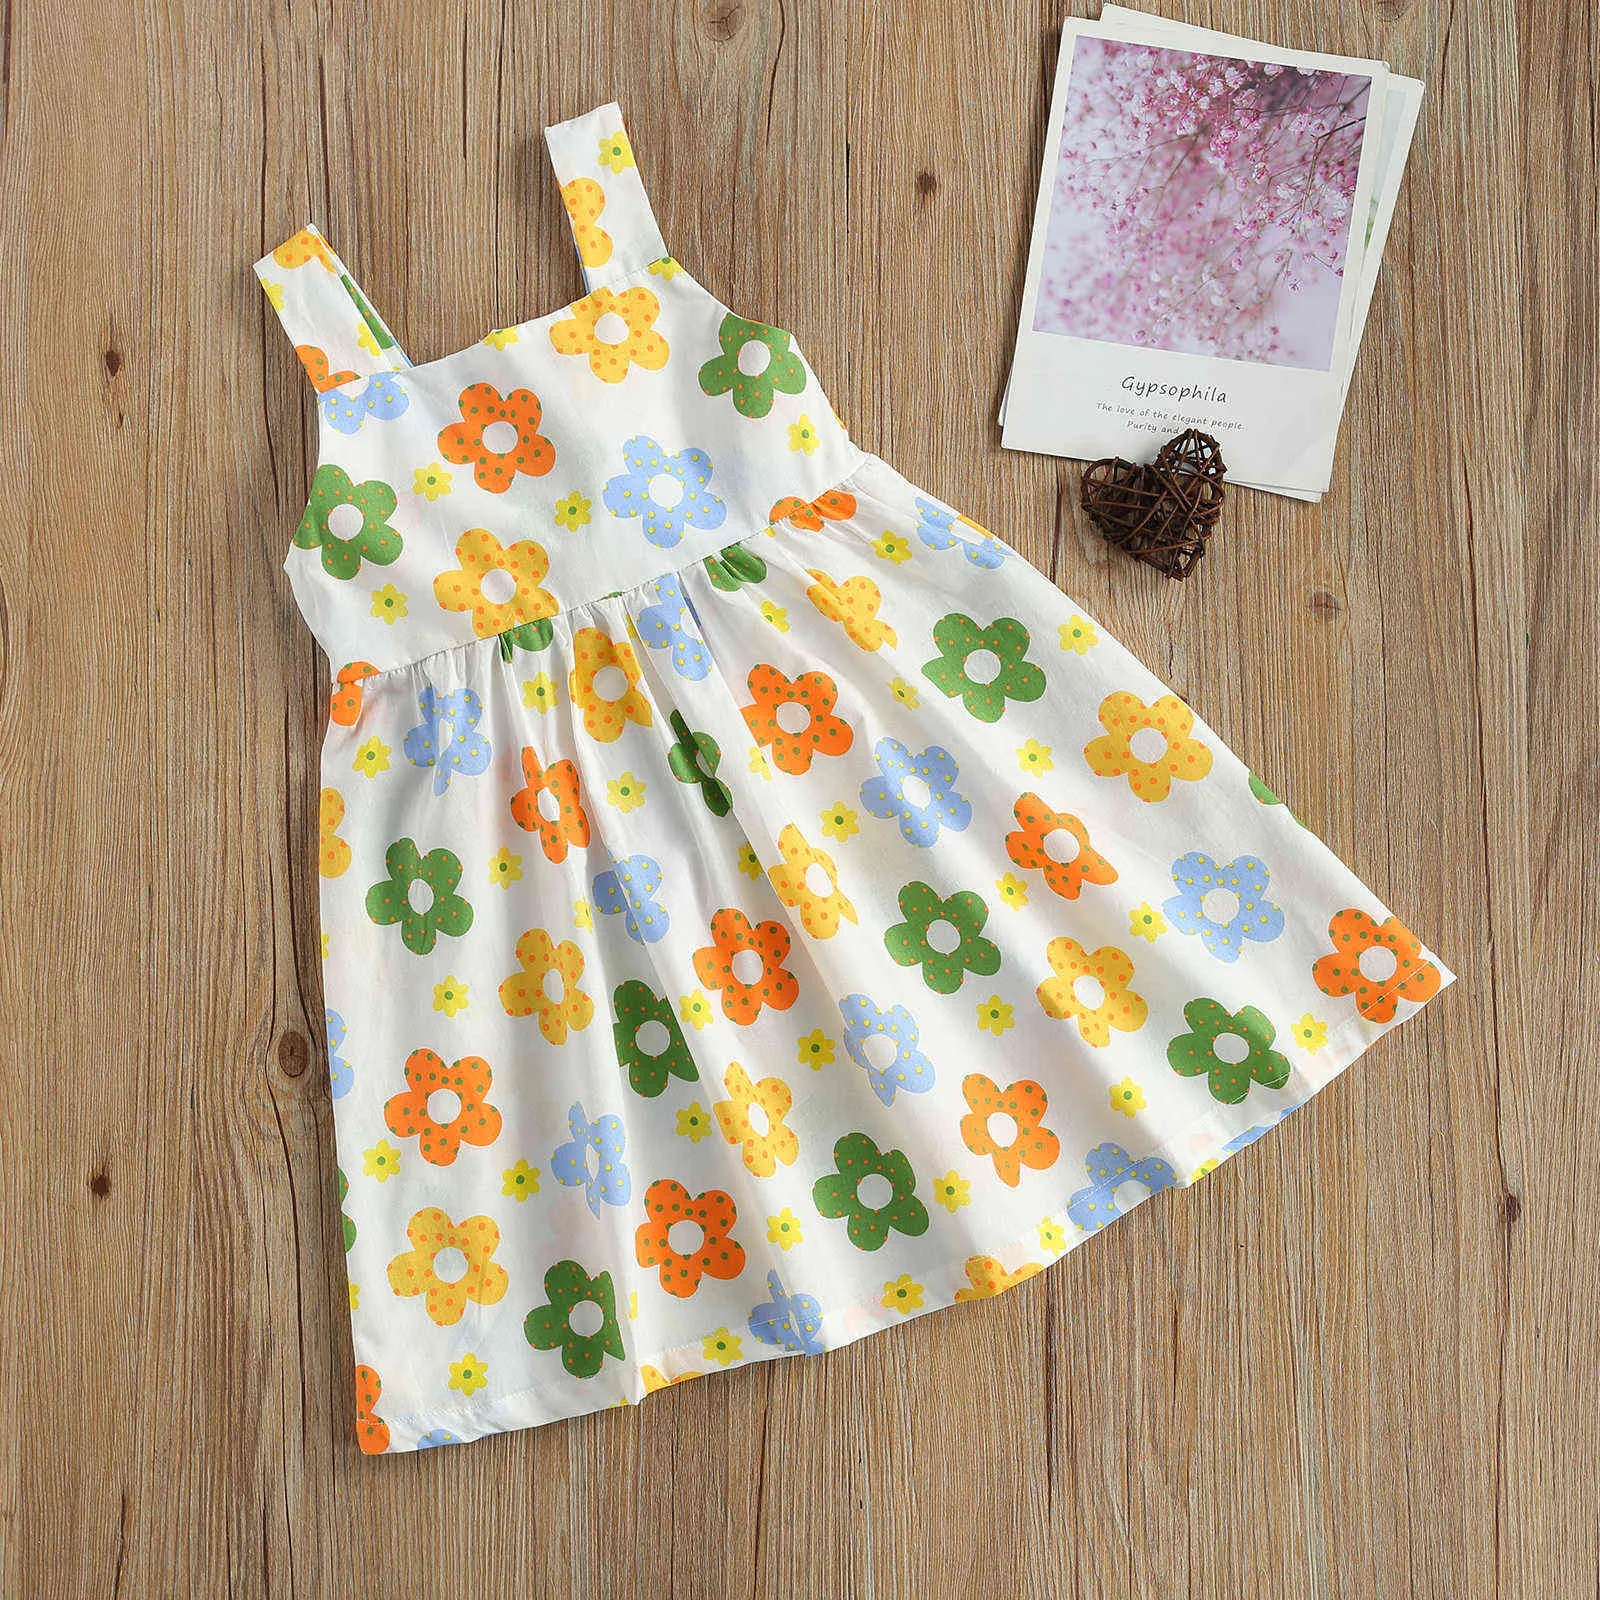 Girl Holiday Style Beach Floral Print Sleeveless Suspender Dress with White Background Suitable For Holiday Birthday Party G1026